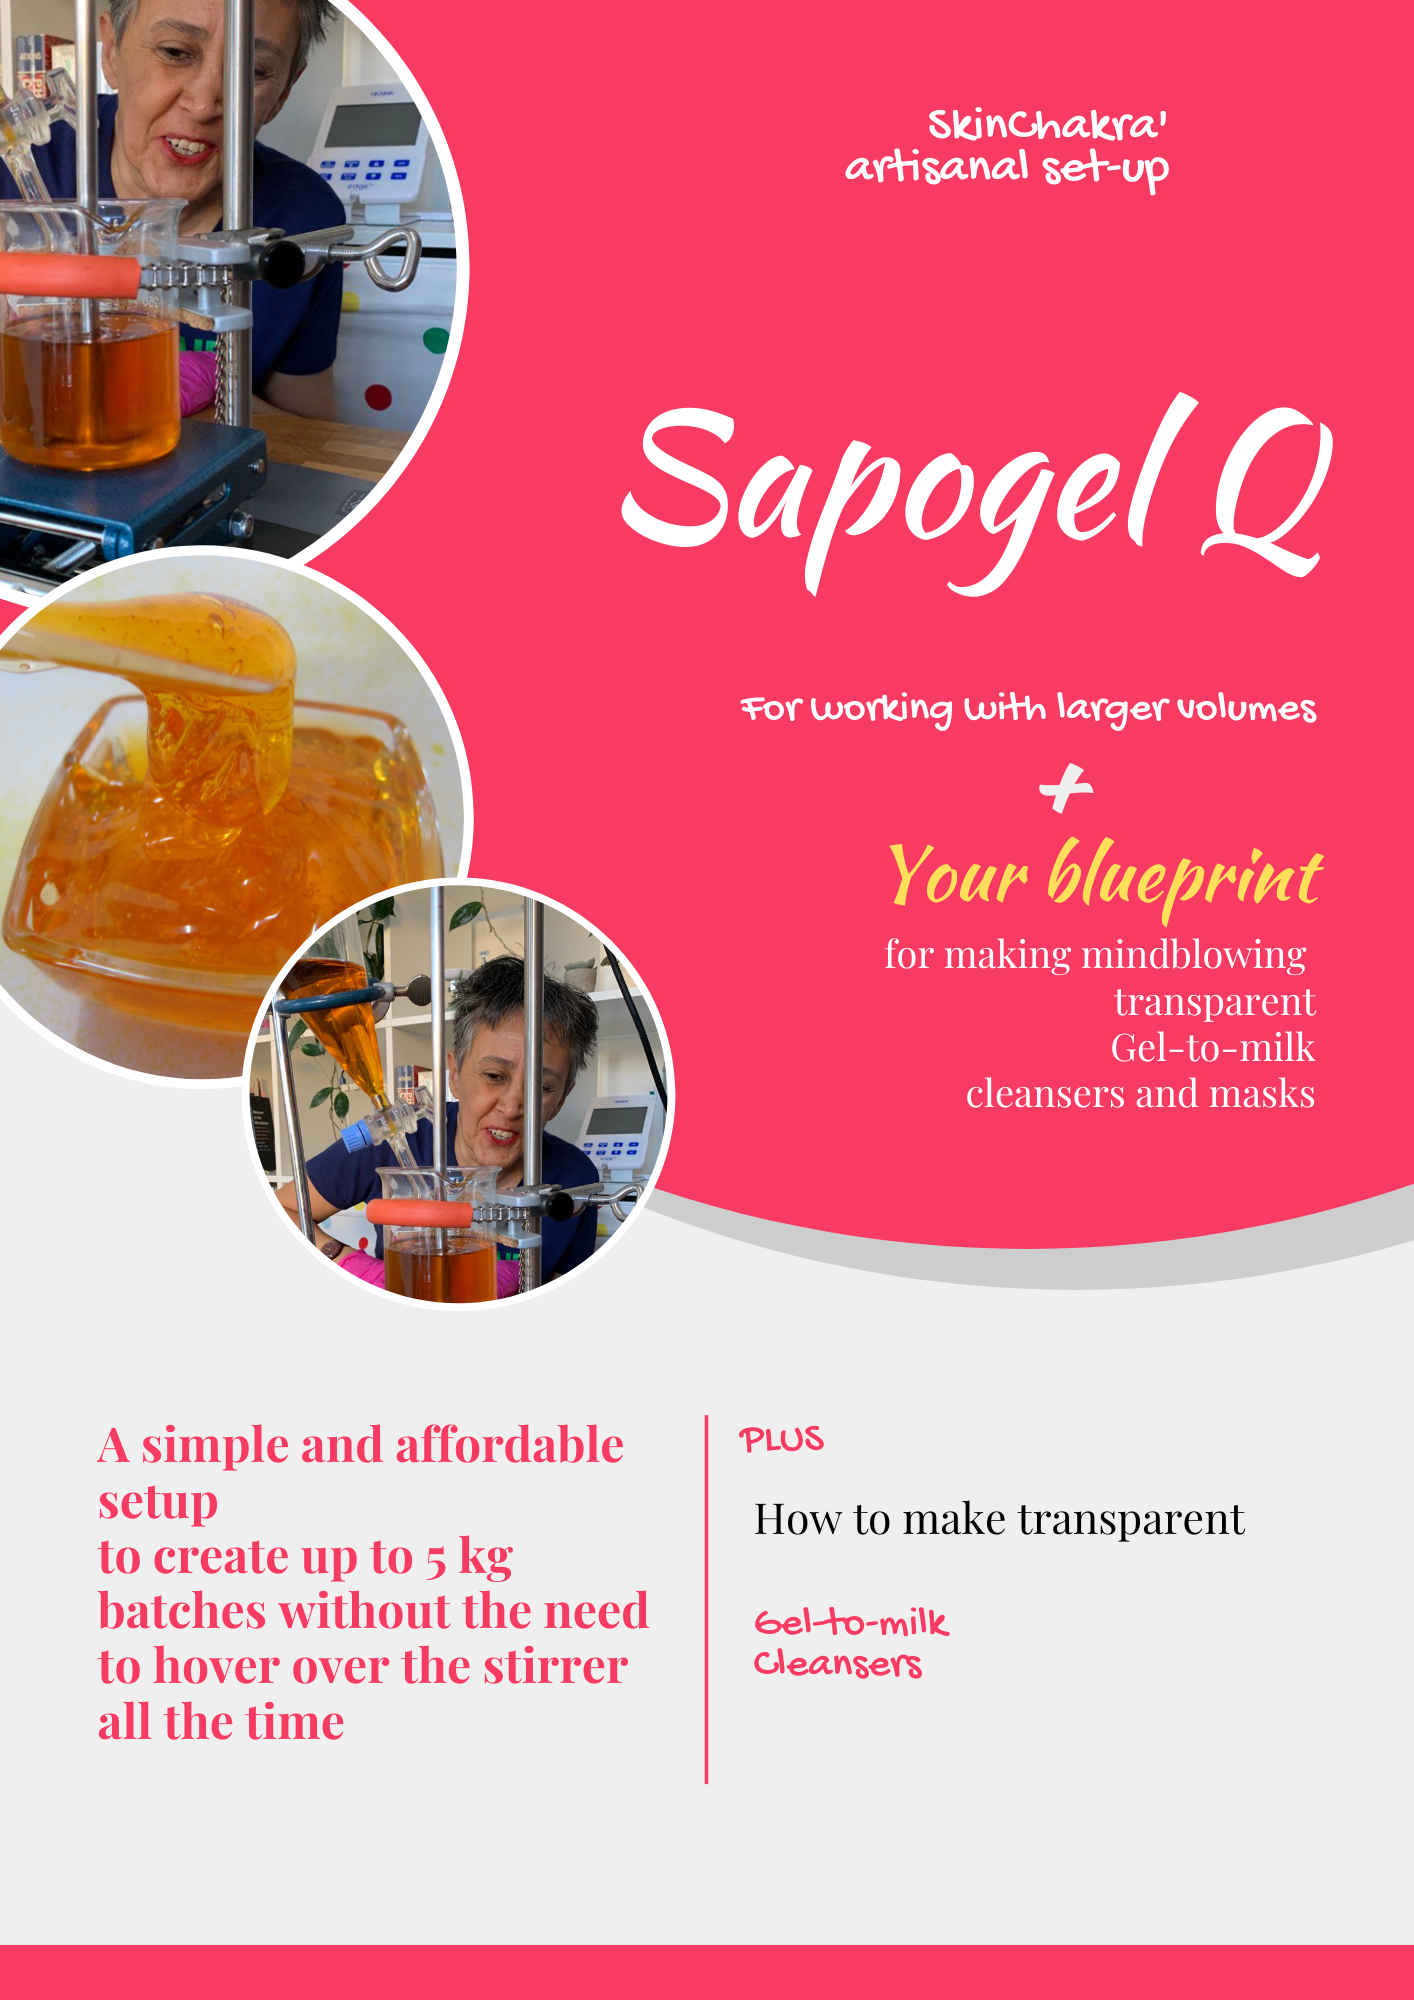 How to work with Sapogel Q in an artisanal lab